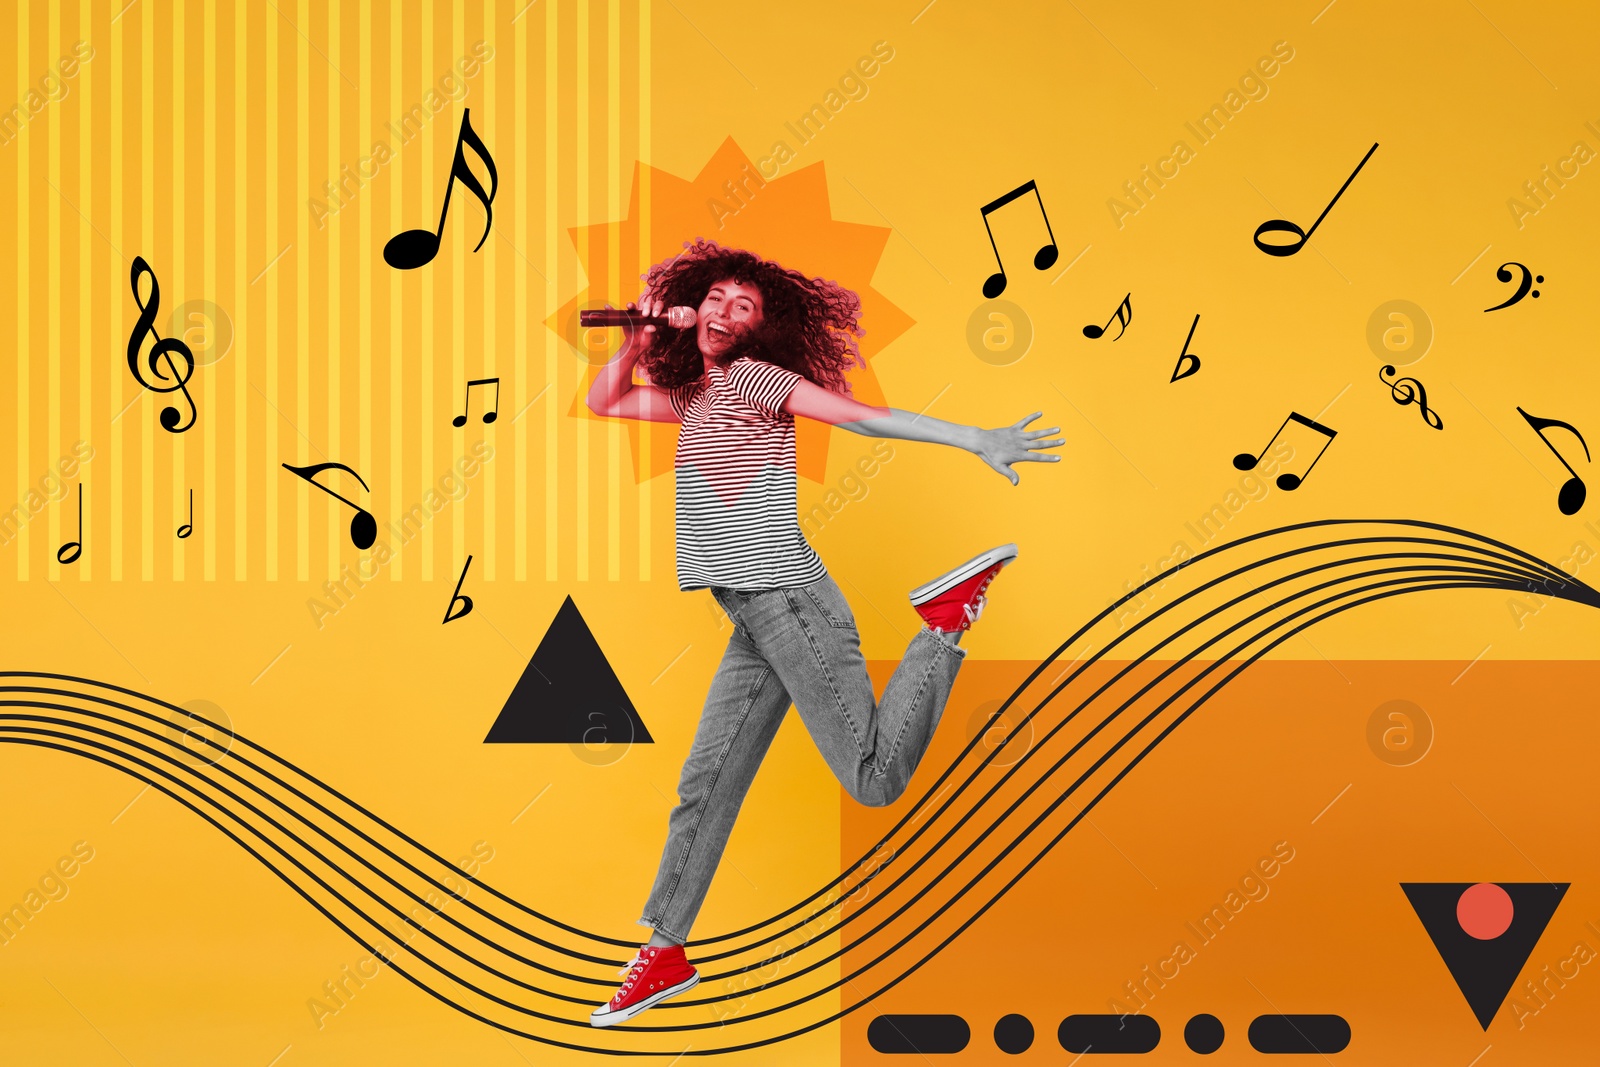 Image of Creative collage for performance poster with woman singing and jumping on bright background